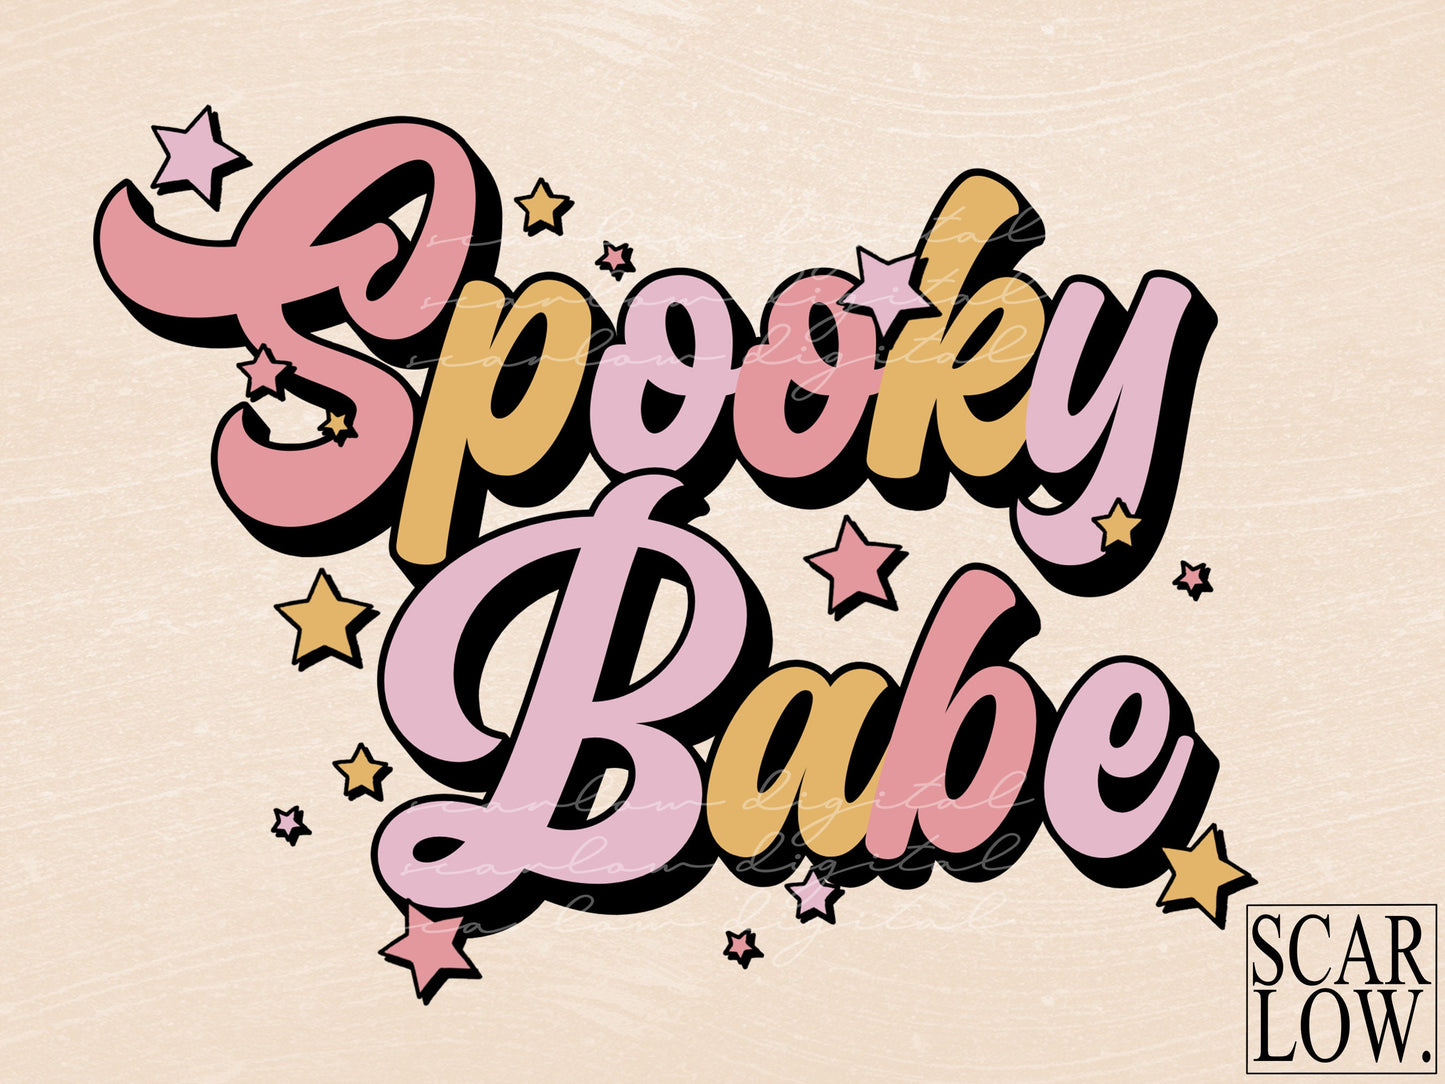 Spooky Babe PNG-Halloween Sublimation Designs-Spooky png, Halloween png, retro Halloween sublimation, boho spooky season png, spooky designs